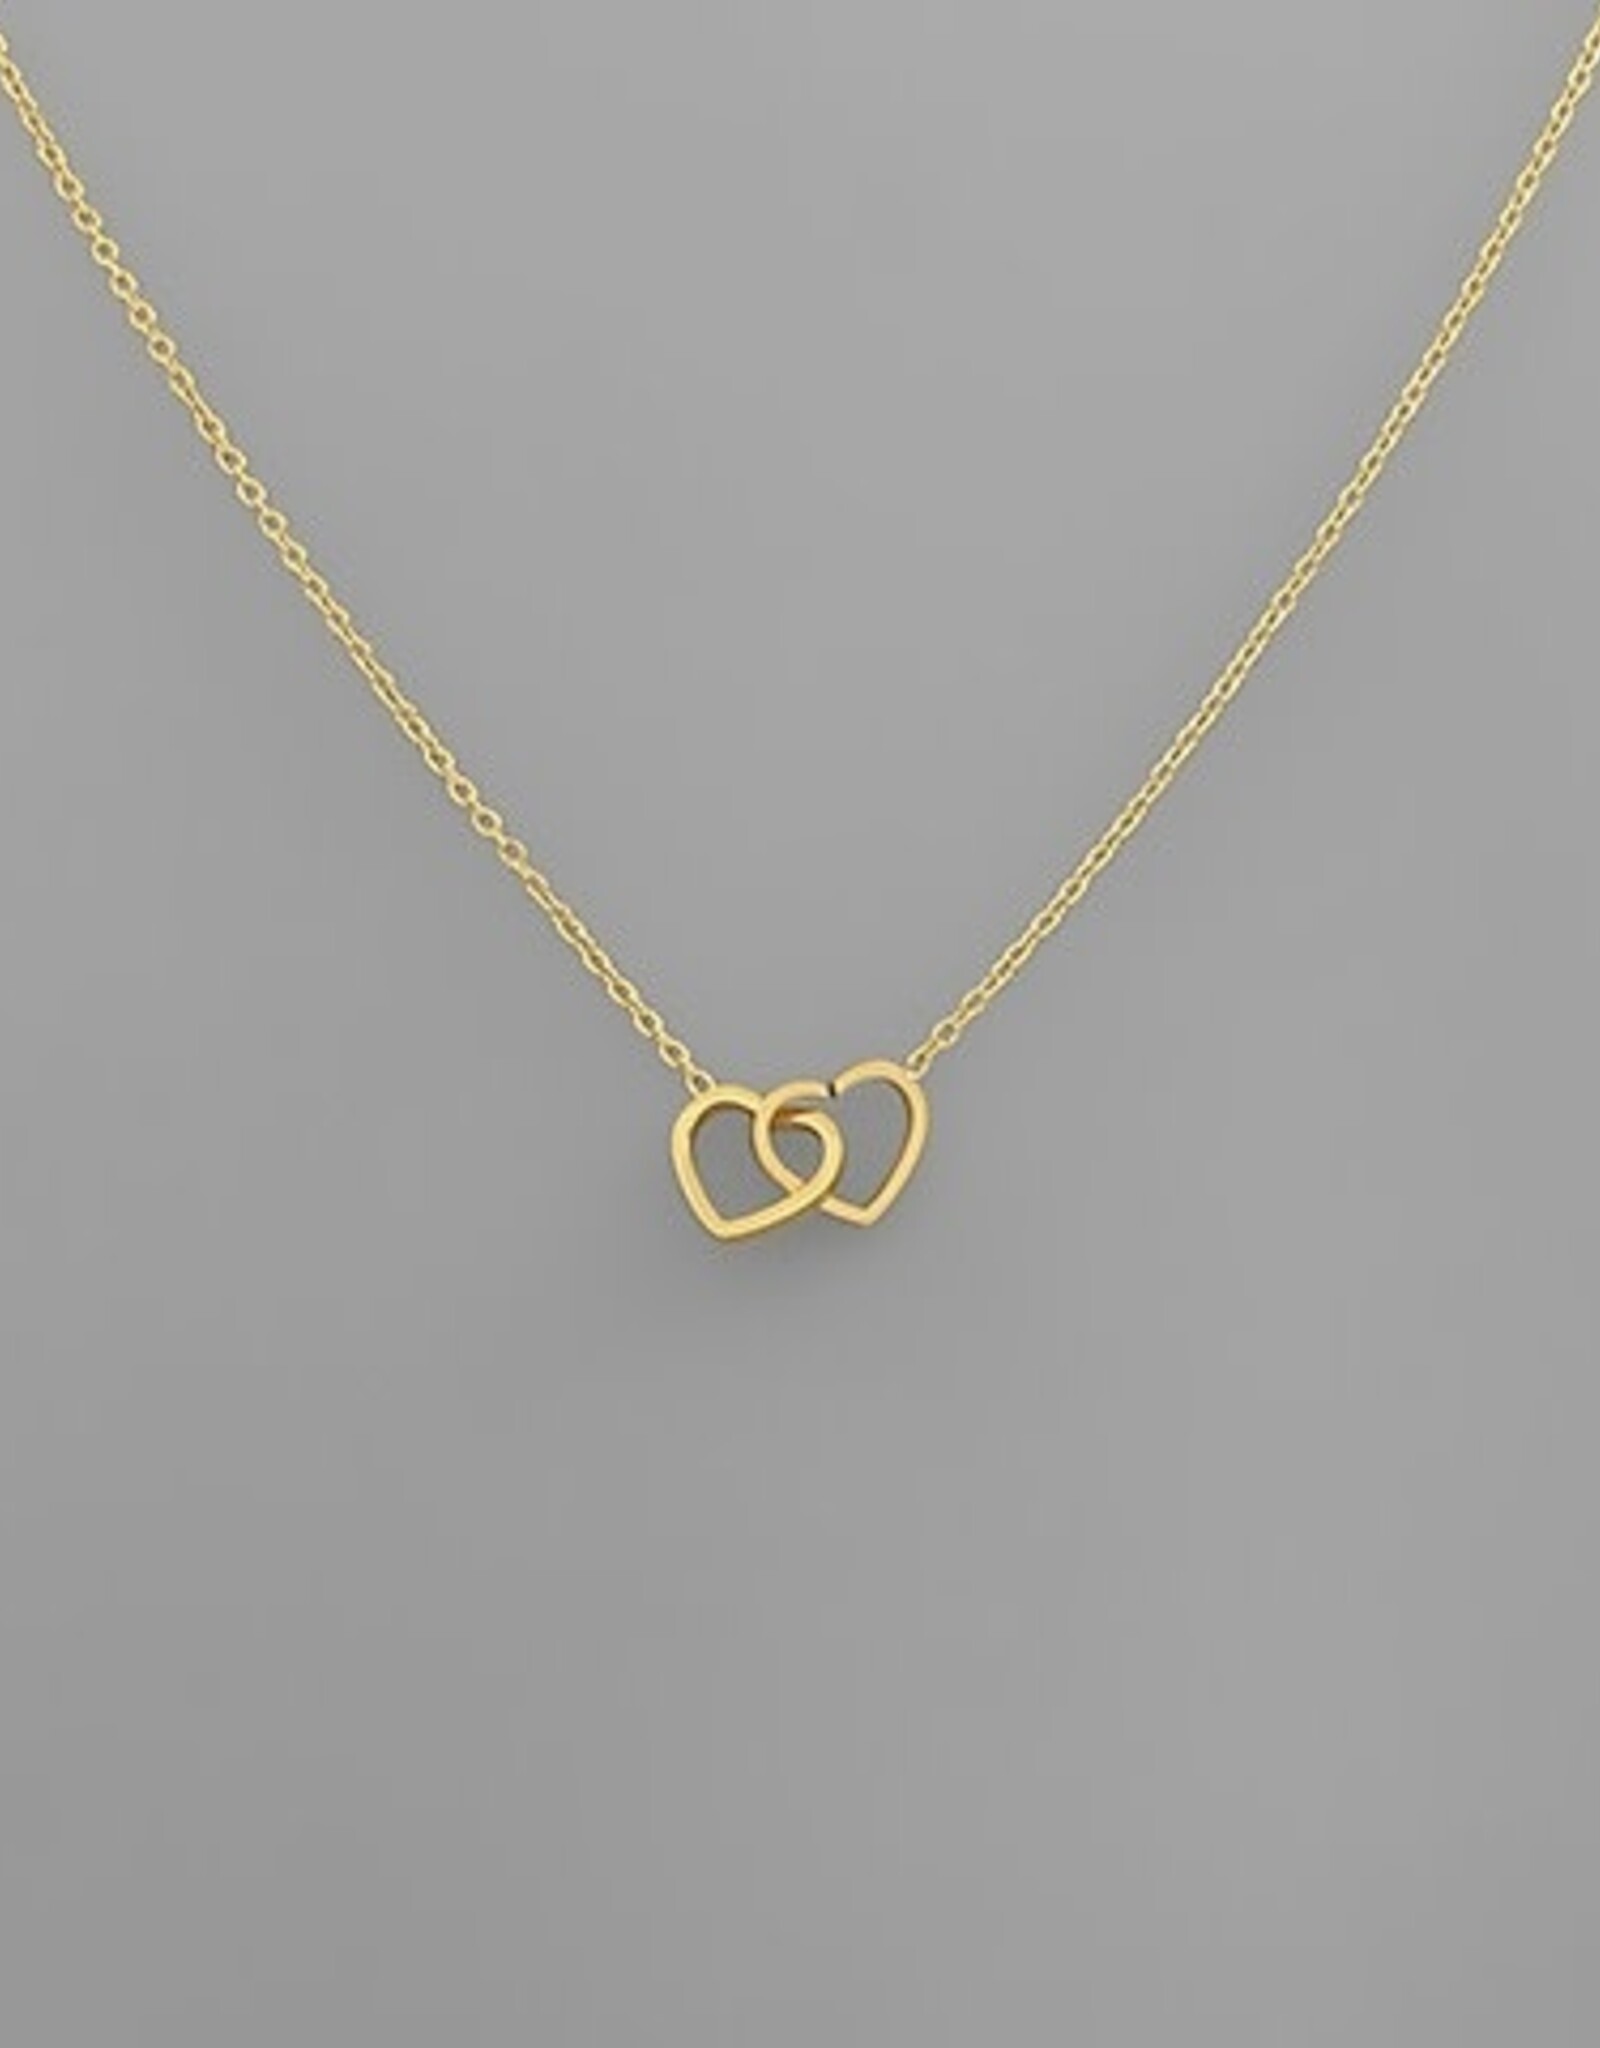 Heart Pendant for Women Valentines Special Golden Dual Heart Chain Pendant  Gold plated Pendant Necklace for Girls & Women